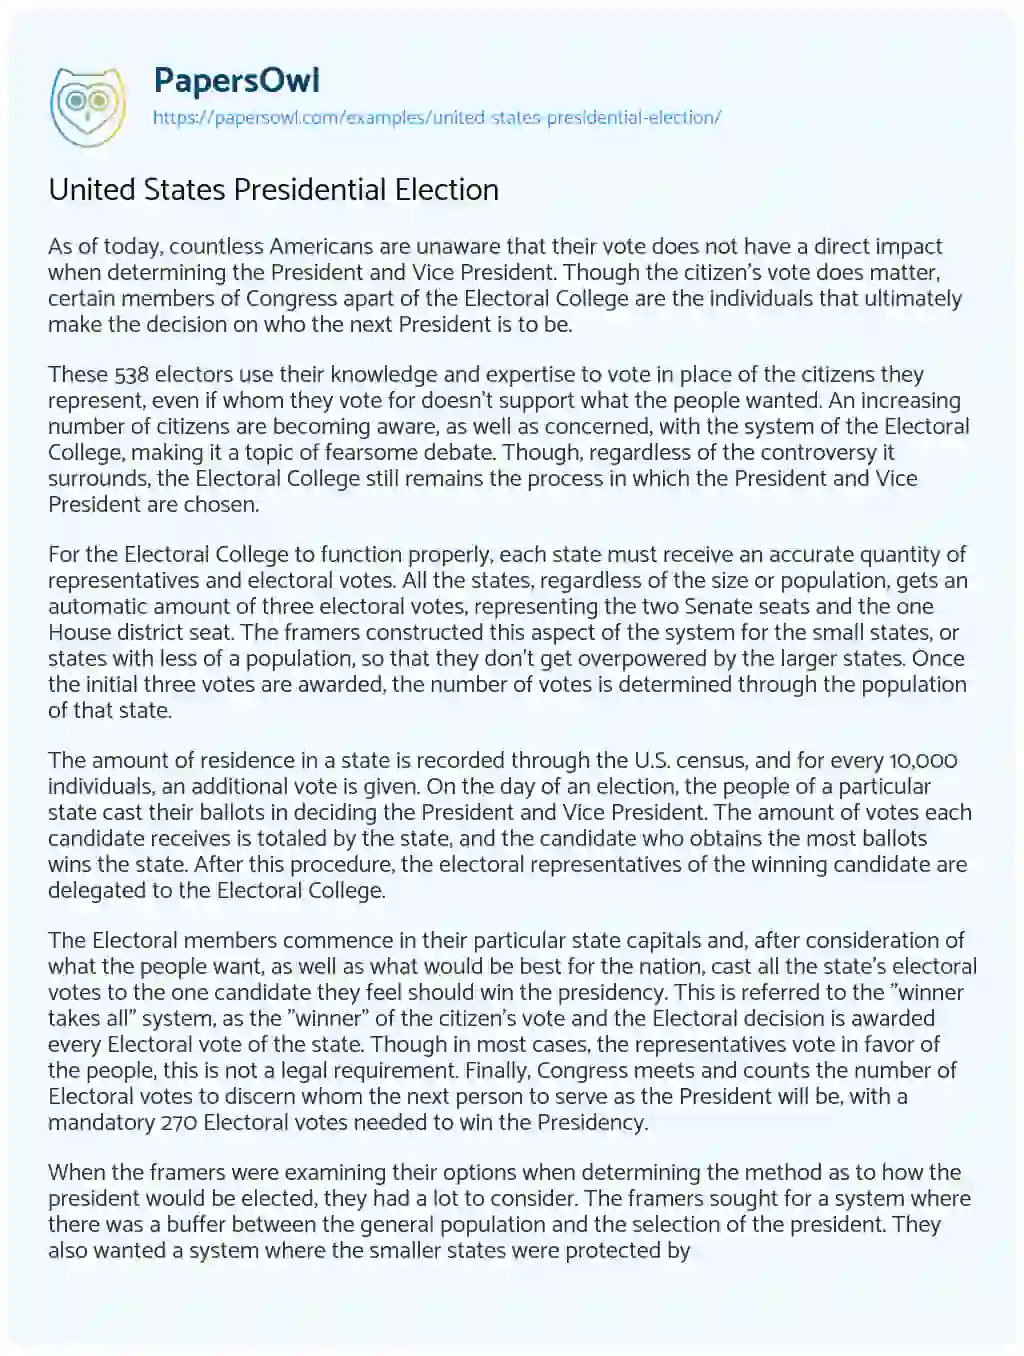 Essay on United States Presidential Election